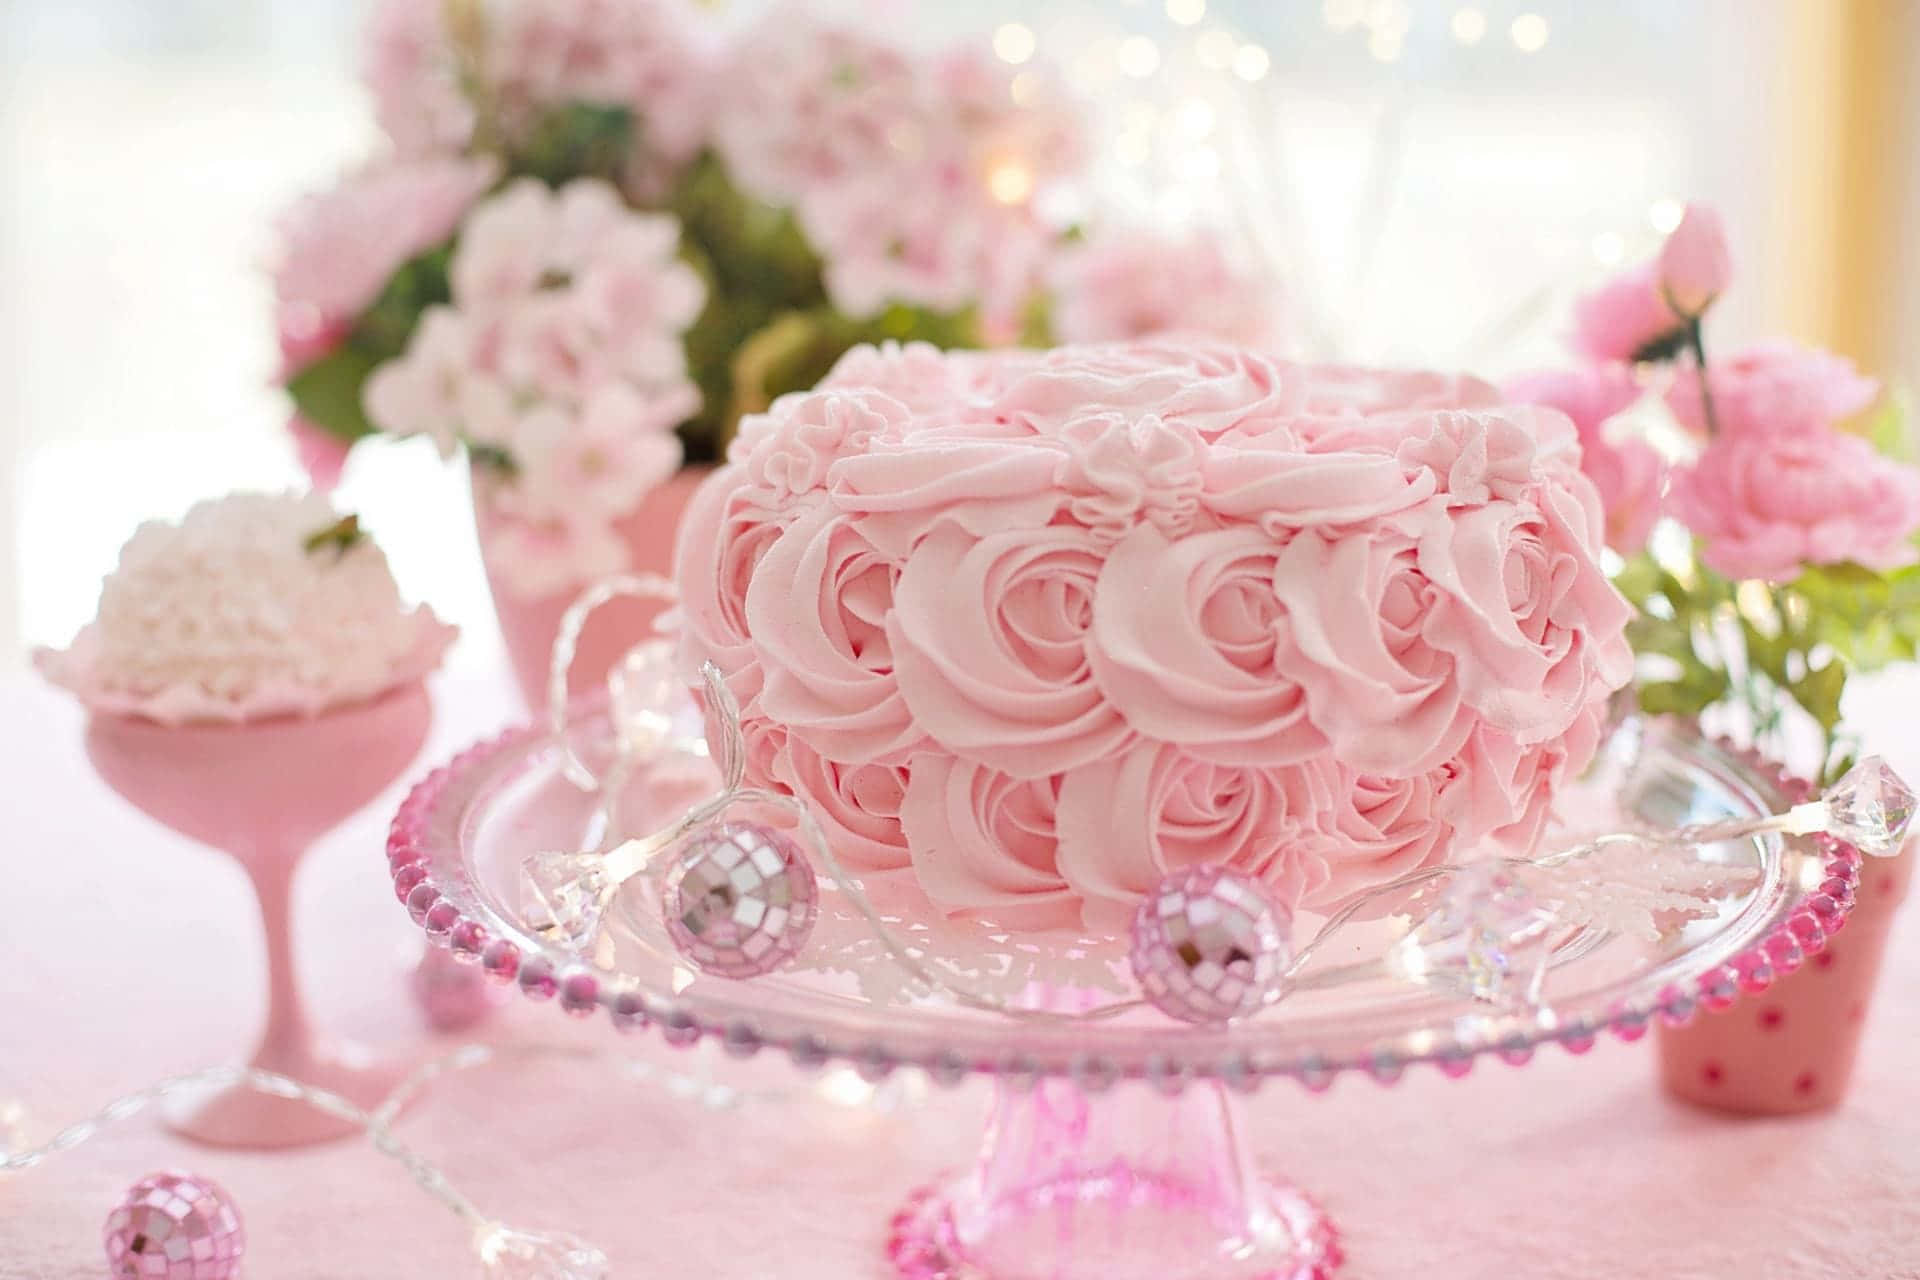 Decorative and delicious, this homemade Fondant cake is absolutely stunning Wallpaper